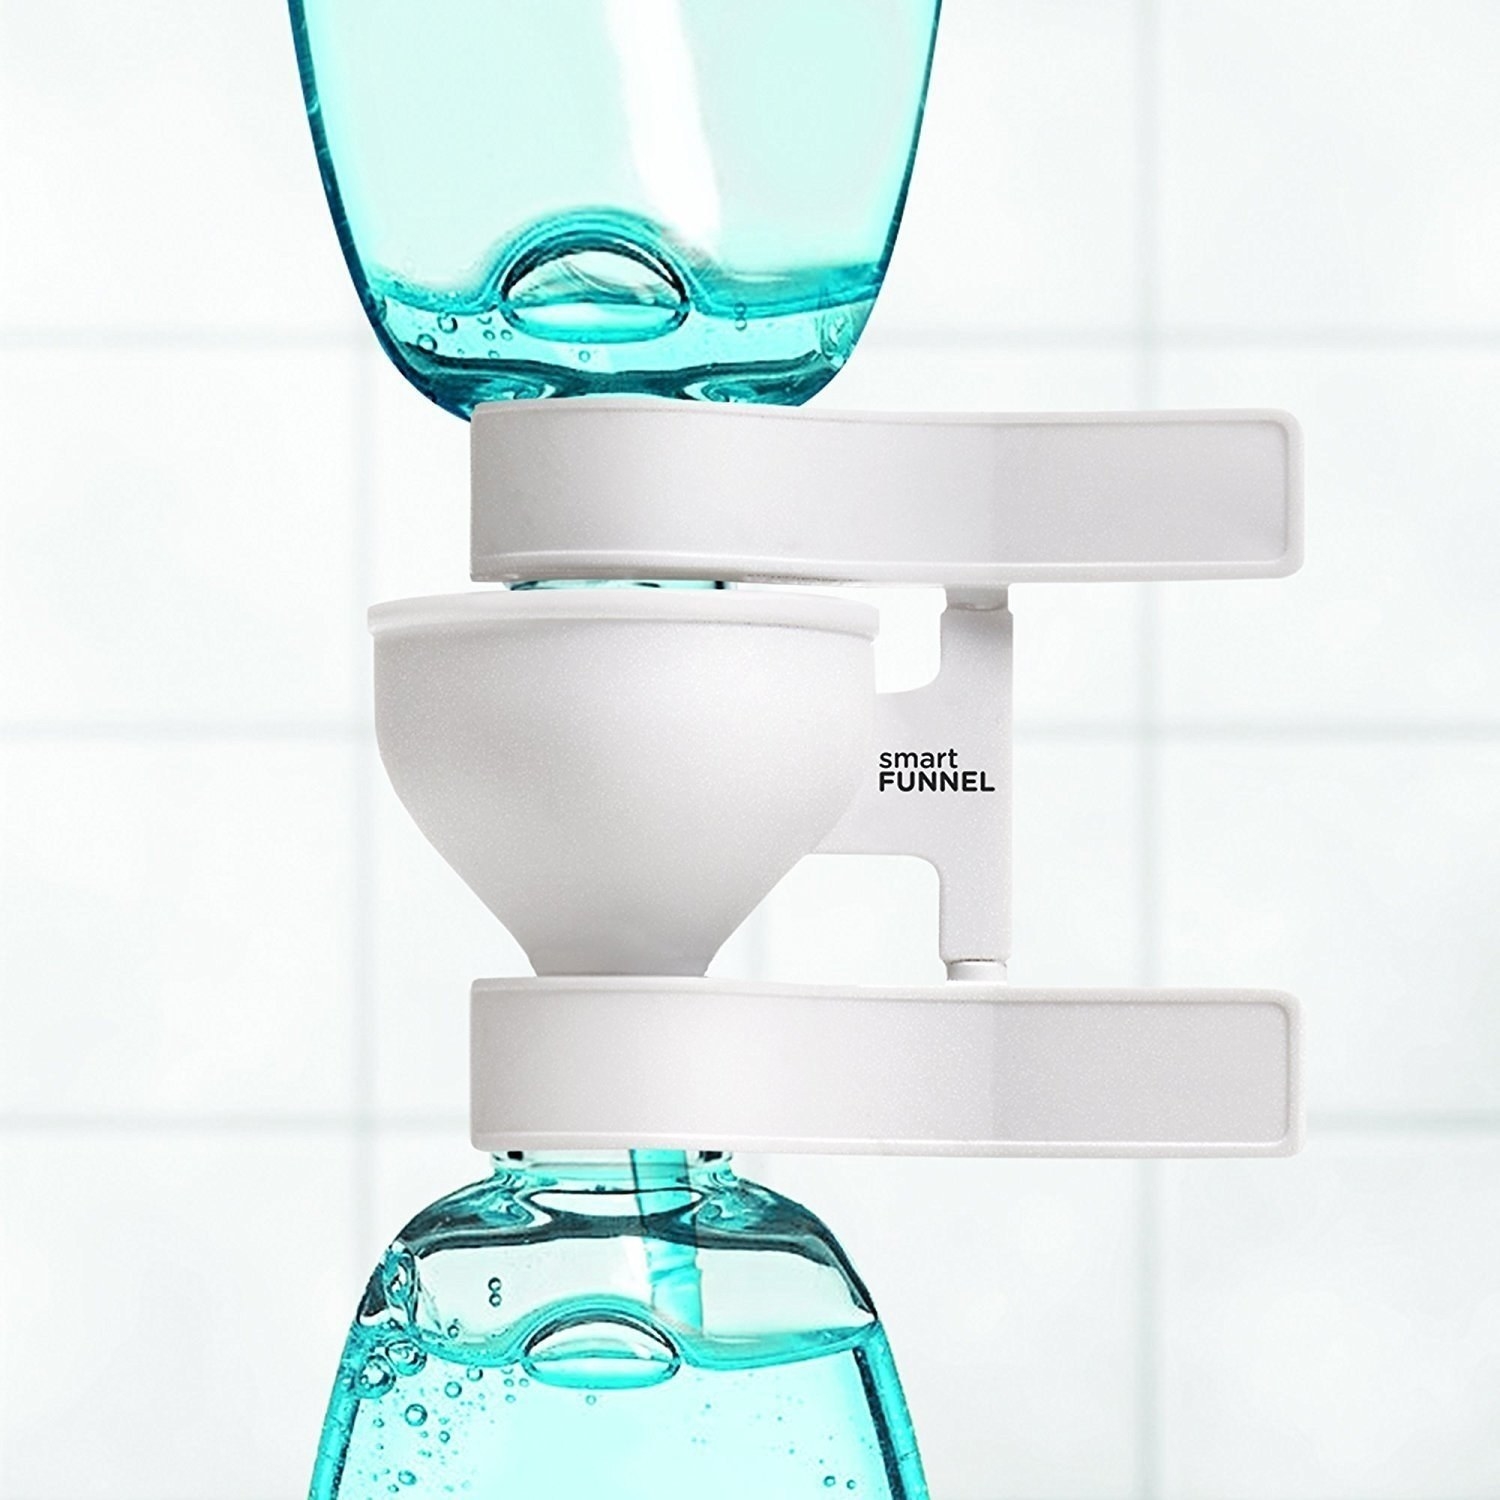 the funnel, which clips to two bottles, allowing one bottle of product to drain into a bottom one